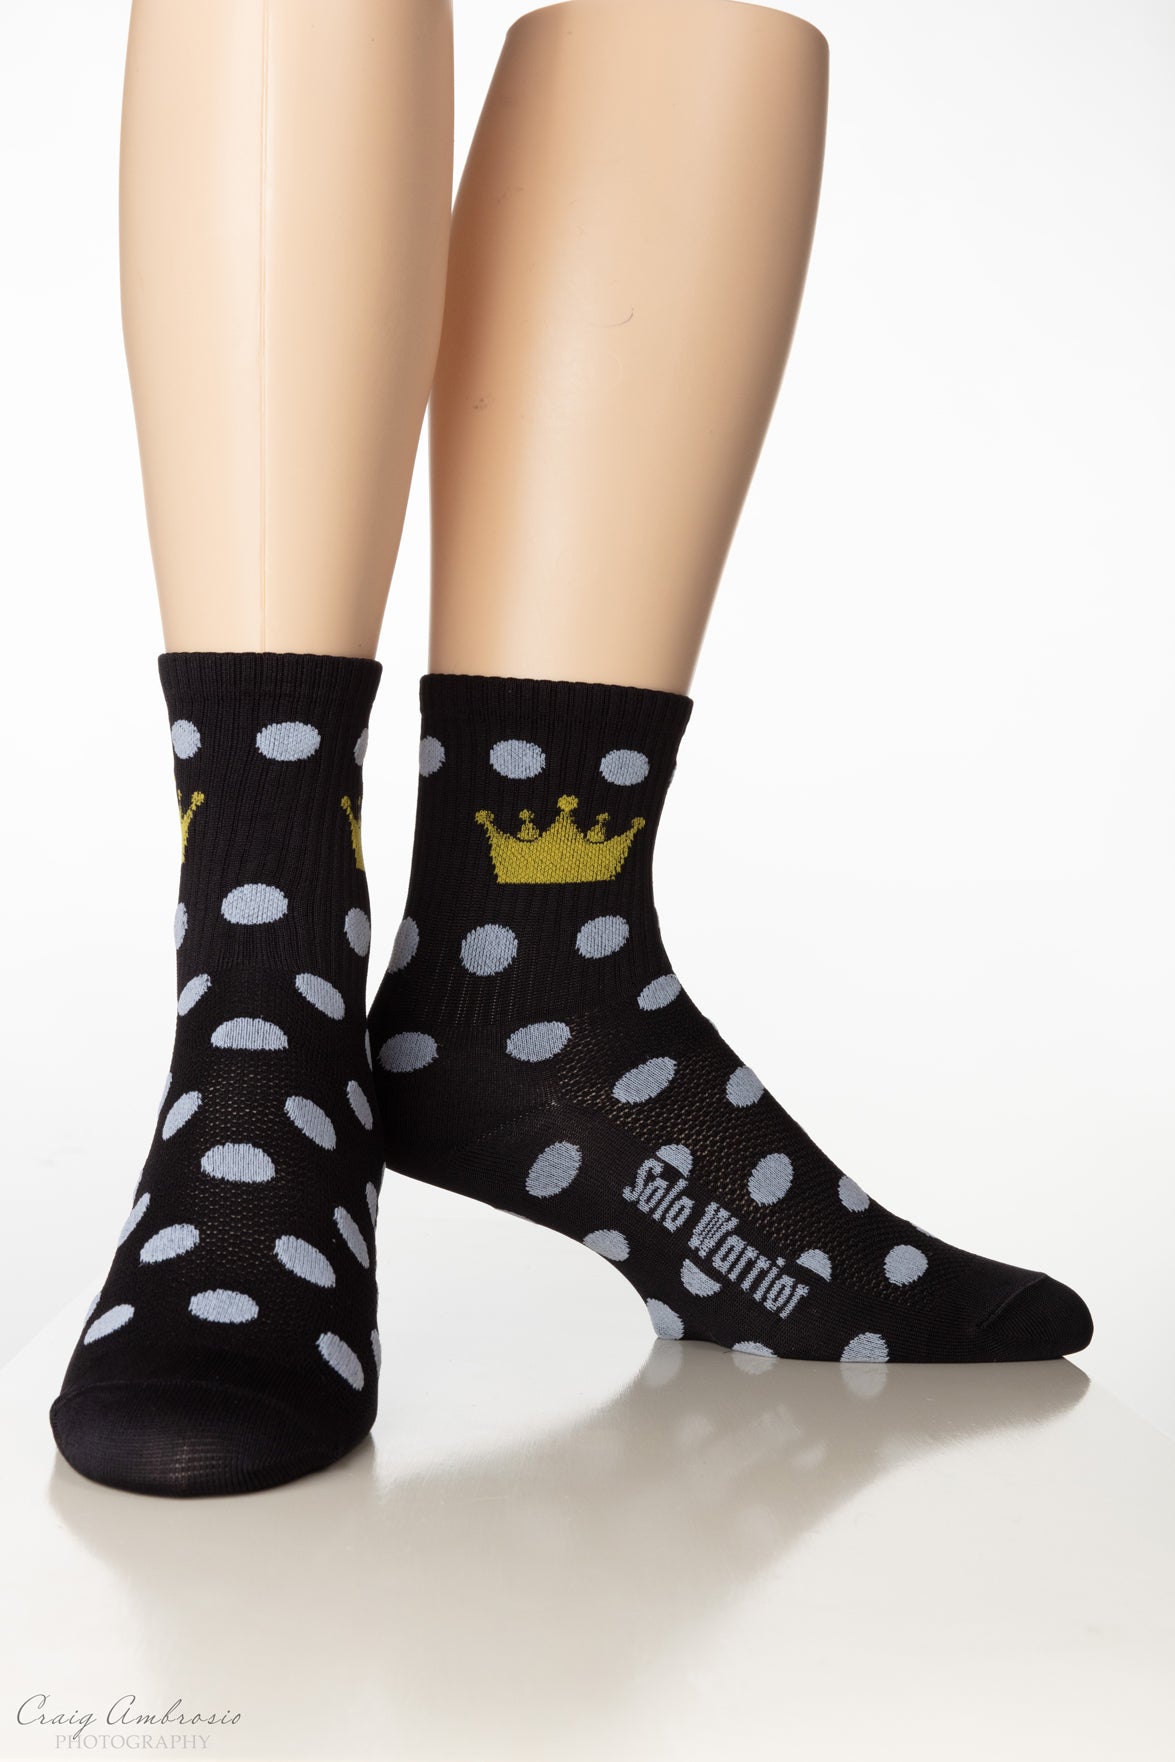 K.O.M.  Men and Women’s Compression Cycling Socks